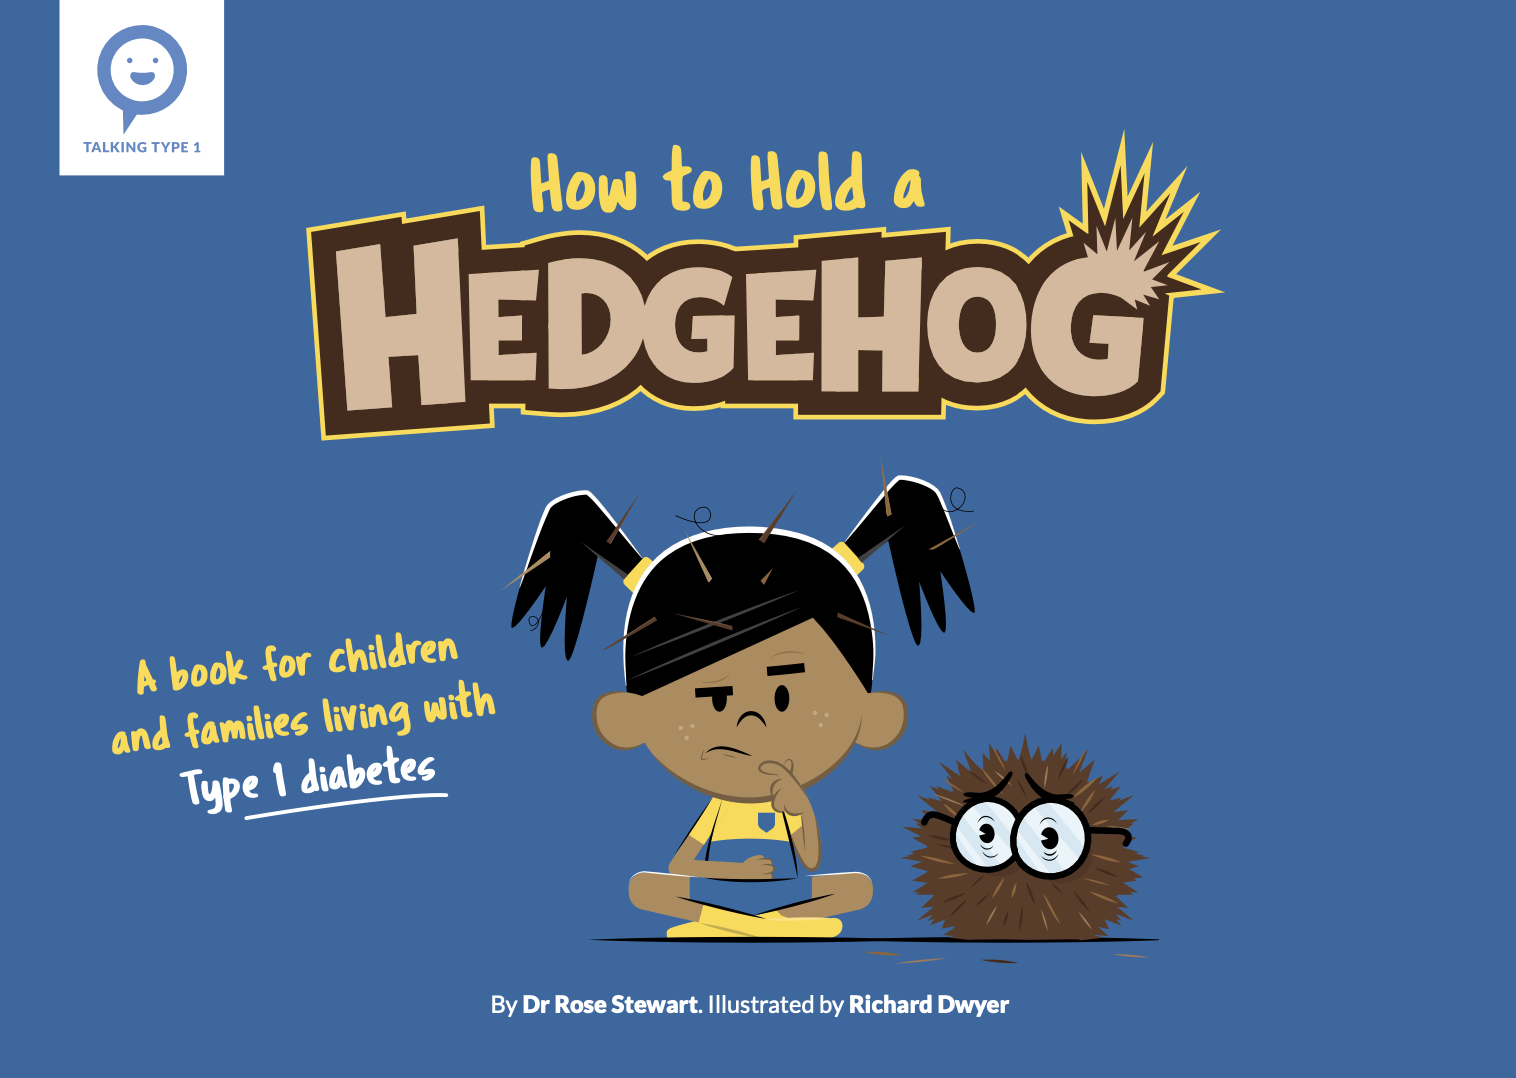 New Animation : How to Hold a Hedgehog